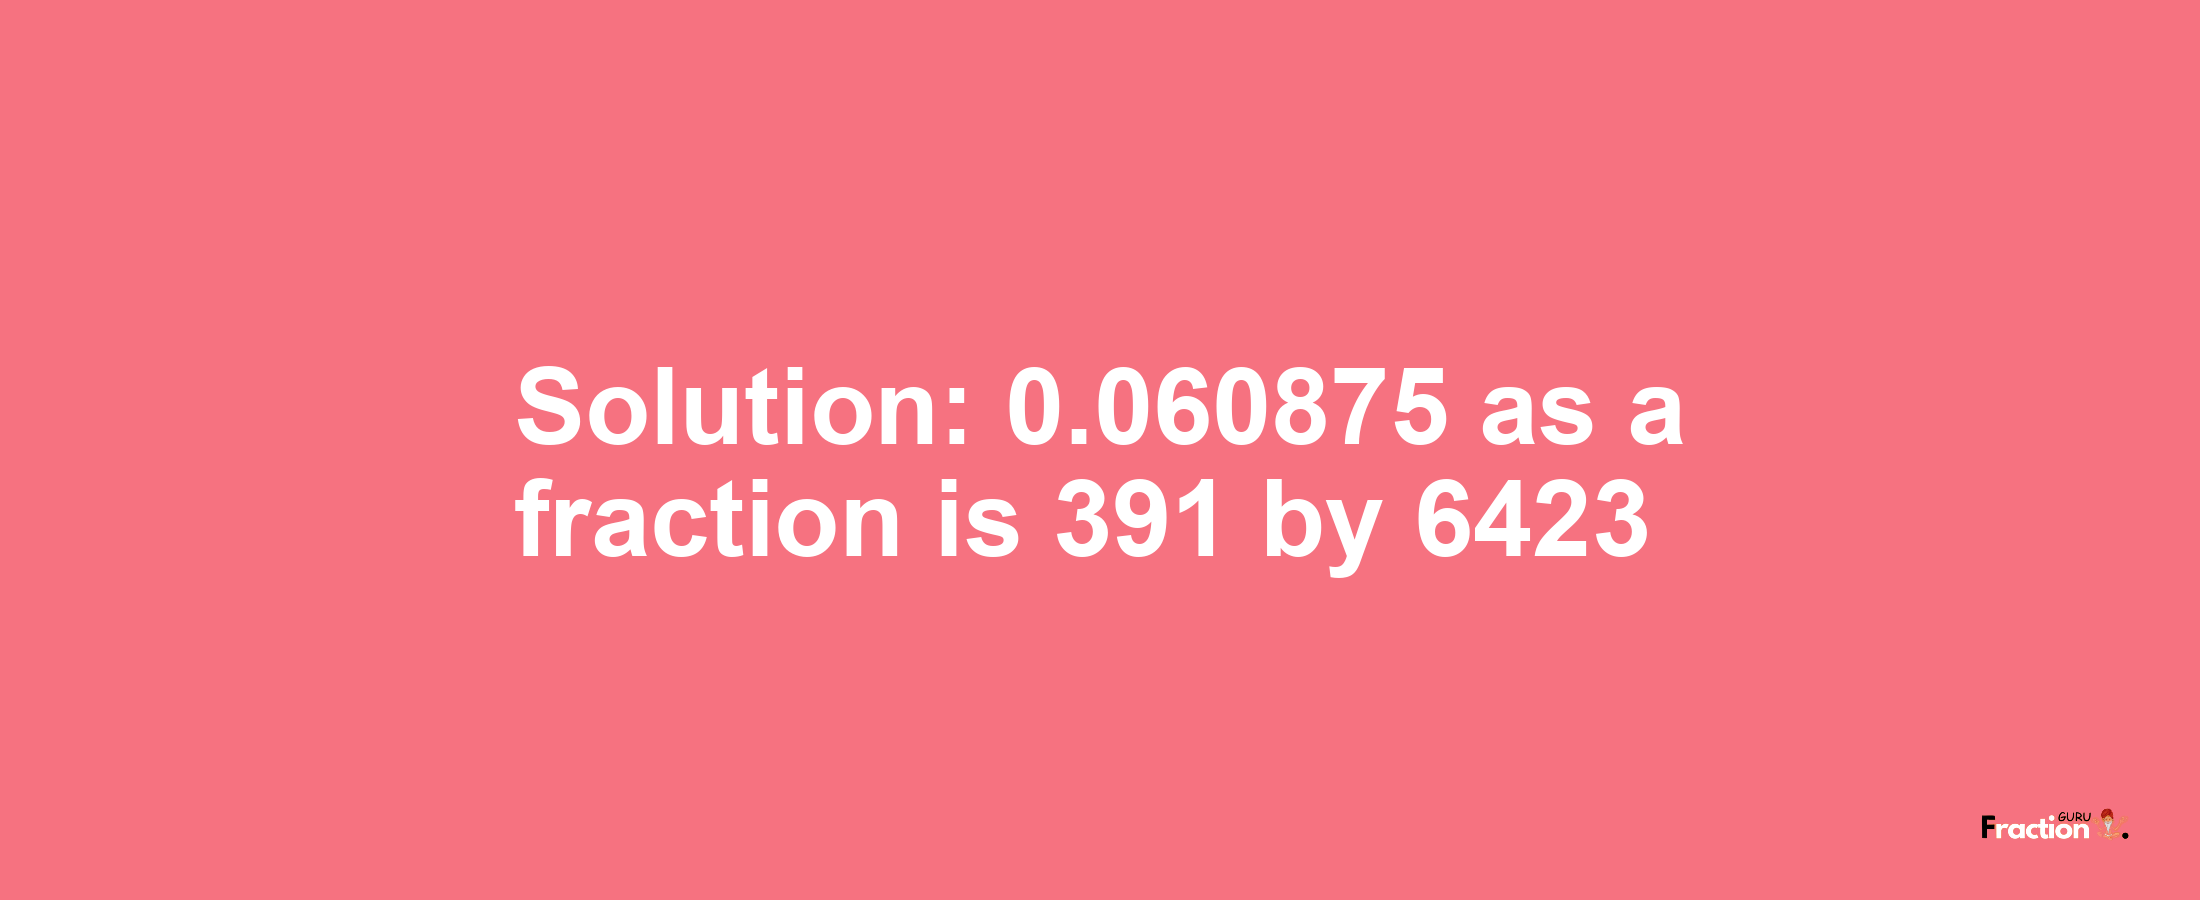 Solution:0.060875 as a fraction is 391/6423